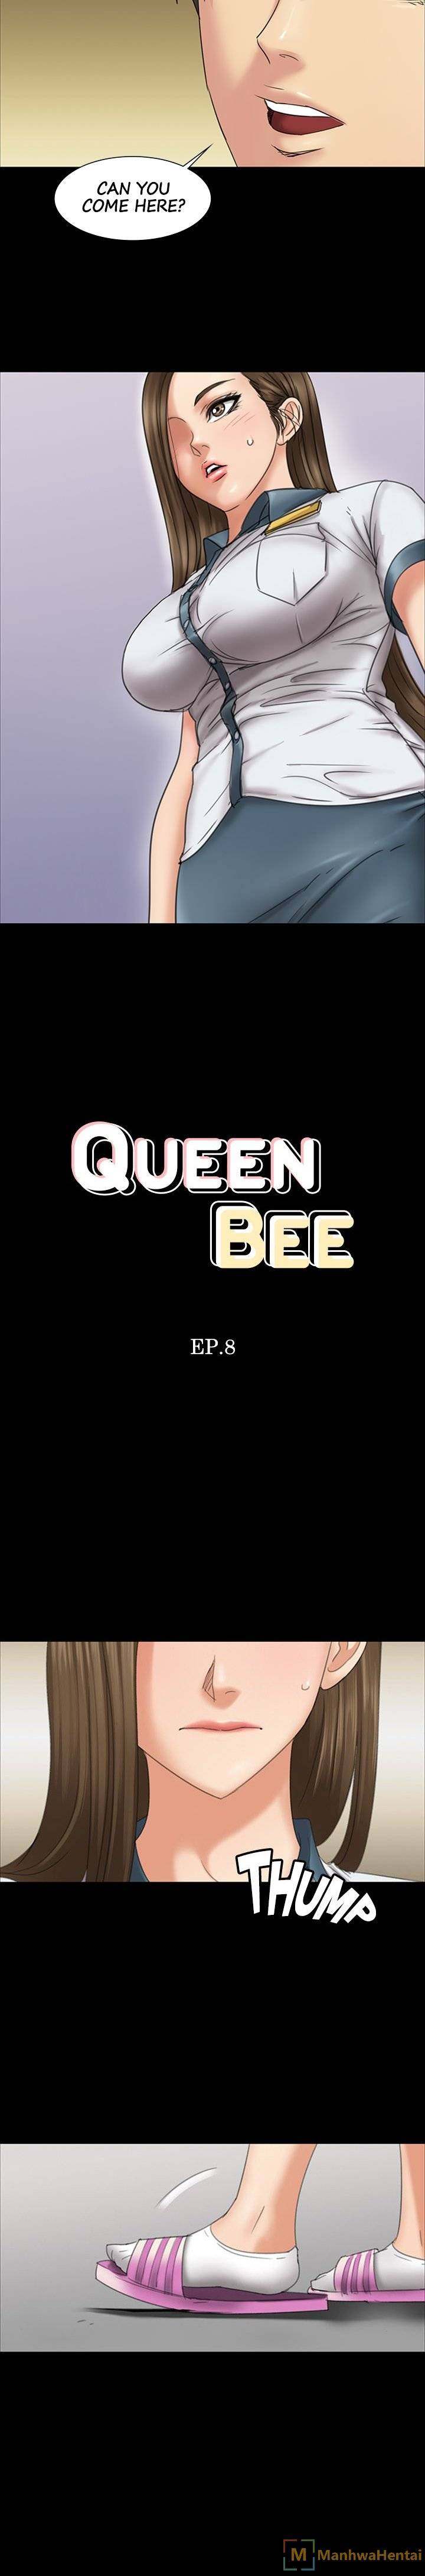 Queen Bee - Page 2